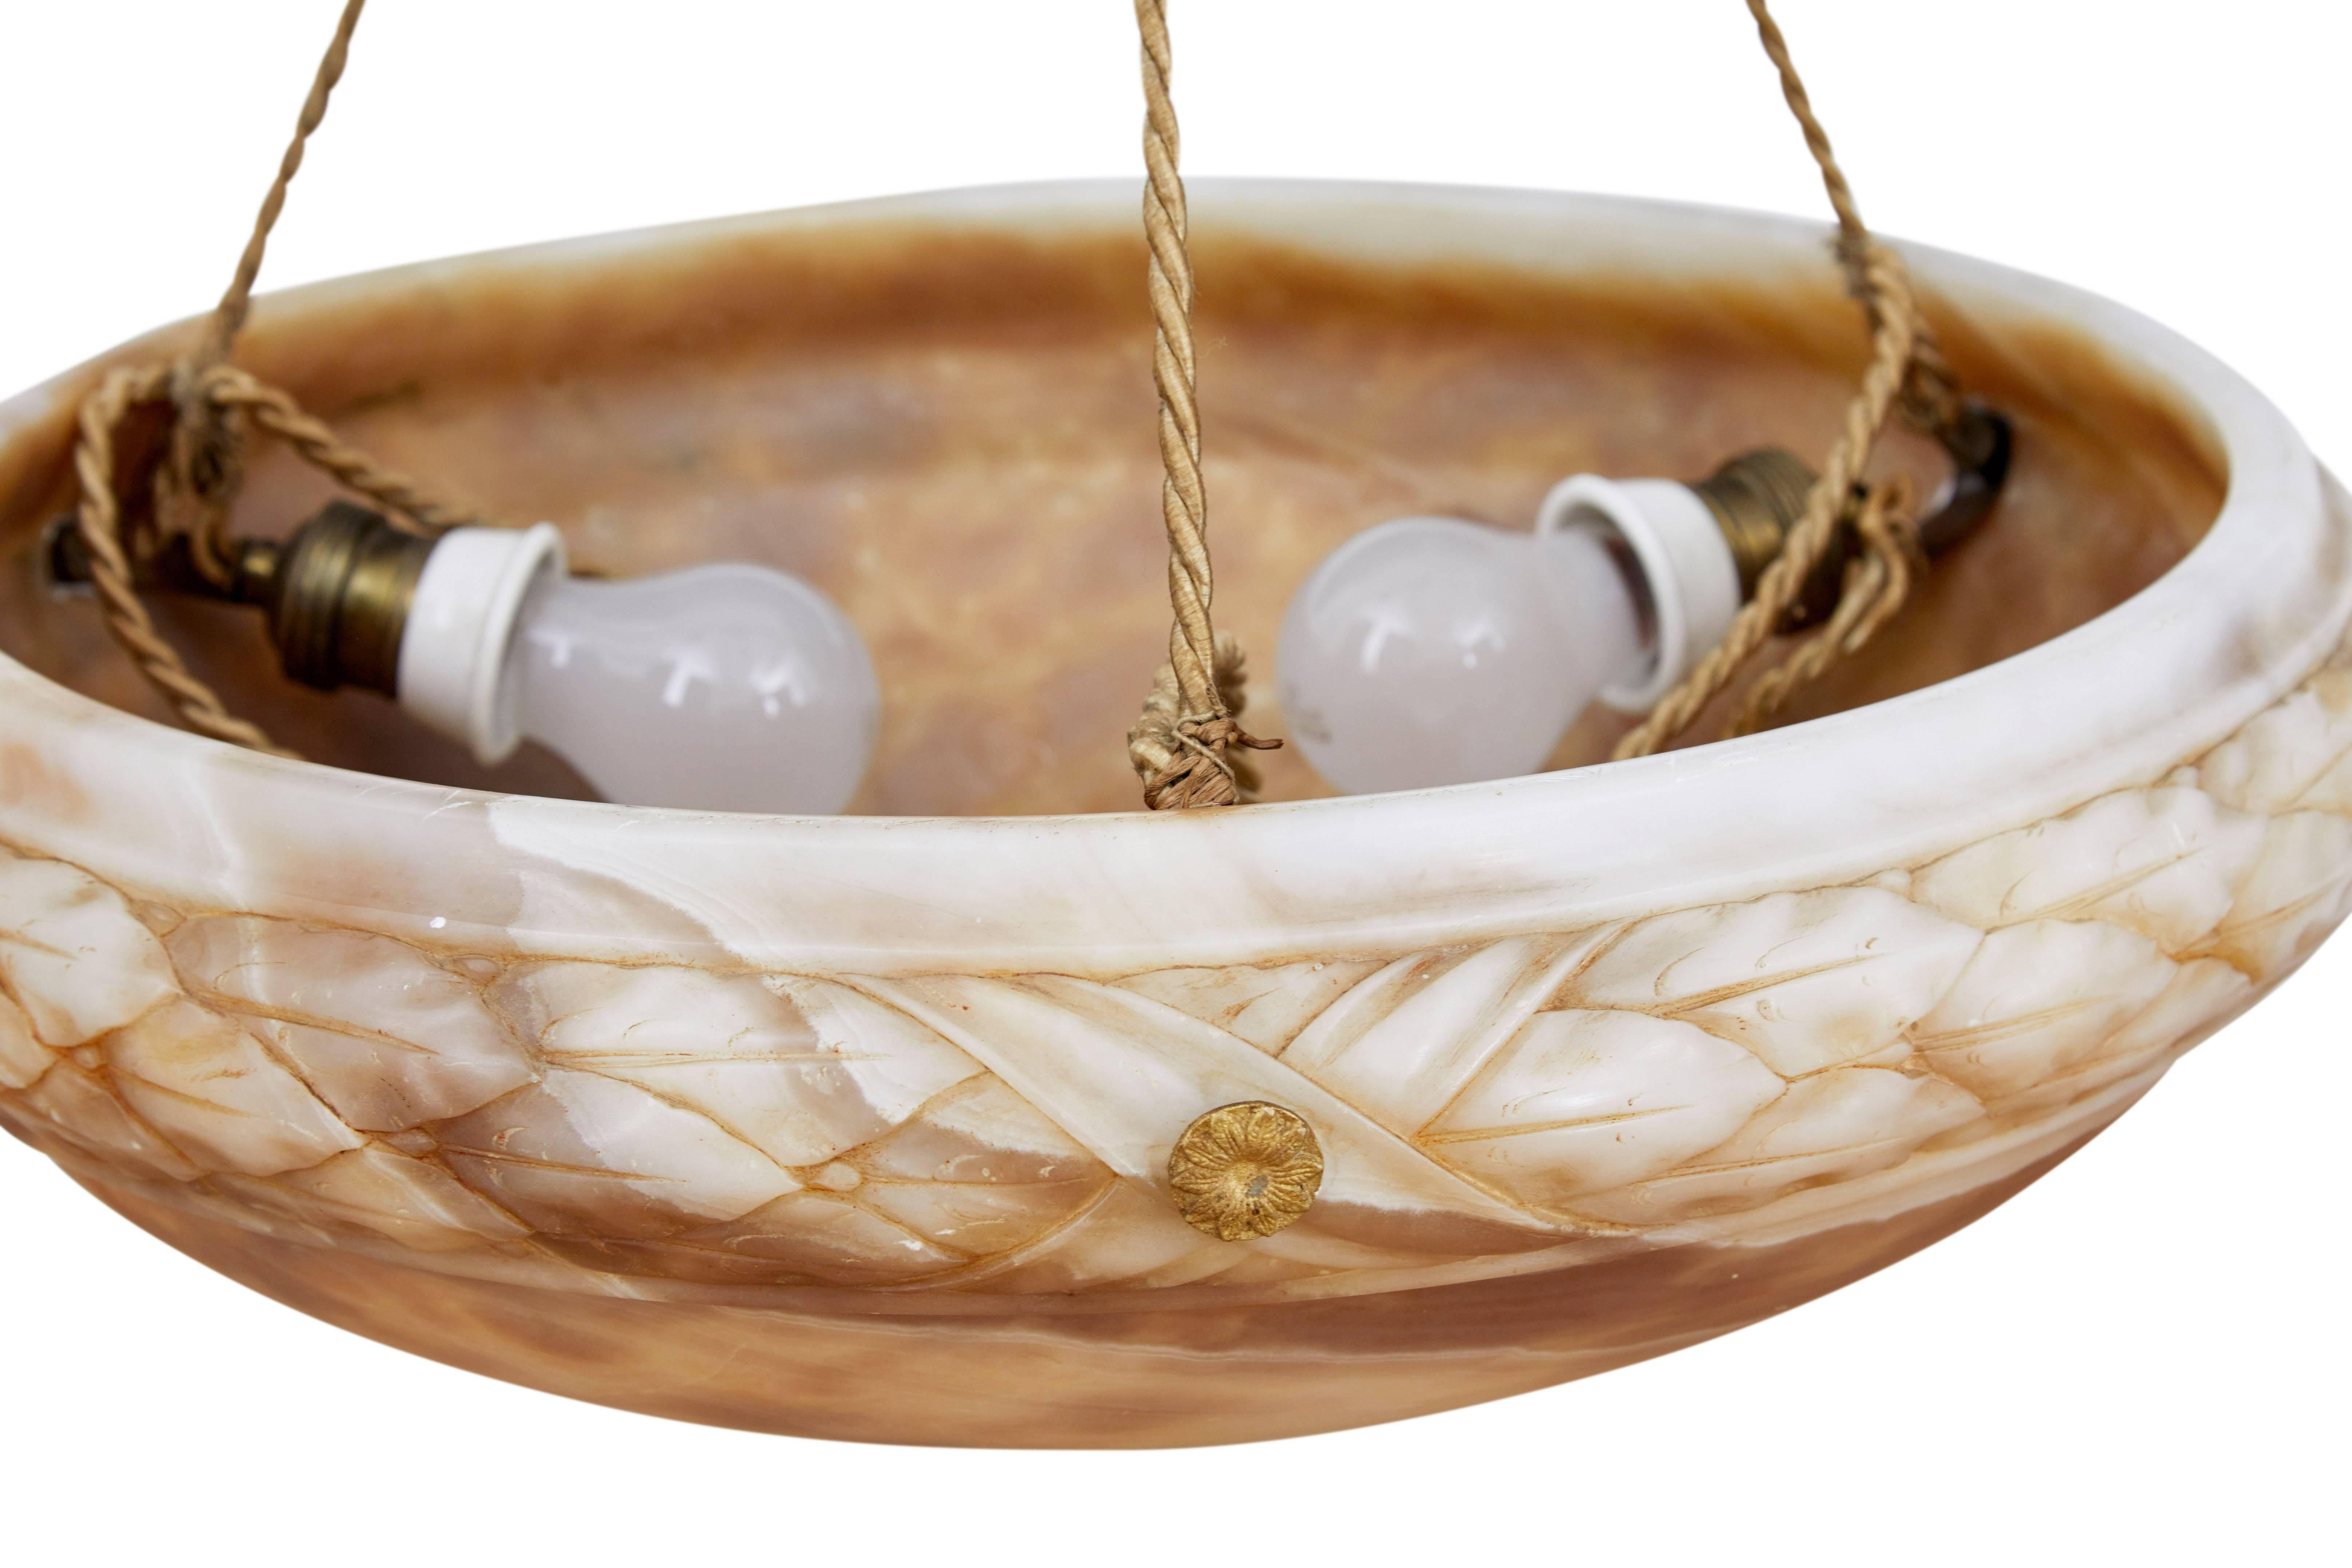 Good quality alabaster ceiling light, circa 1920.
Circular dish with carved detail around the edge.
Three bulb holders, suspended by three rope chains to central rose.

We recommend that this light is professionally rewired and